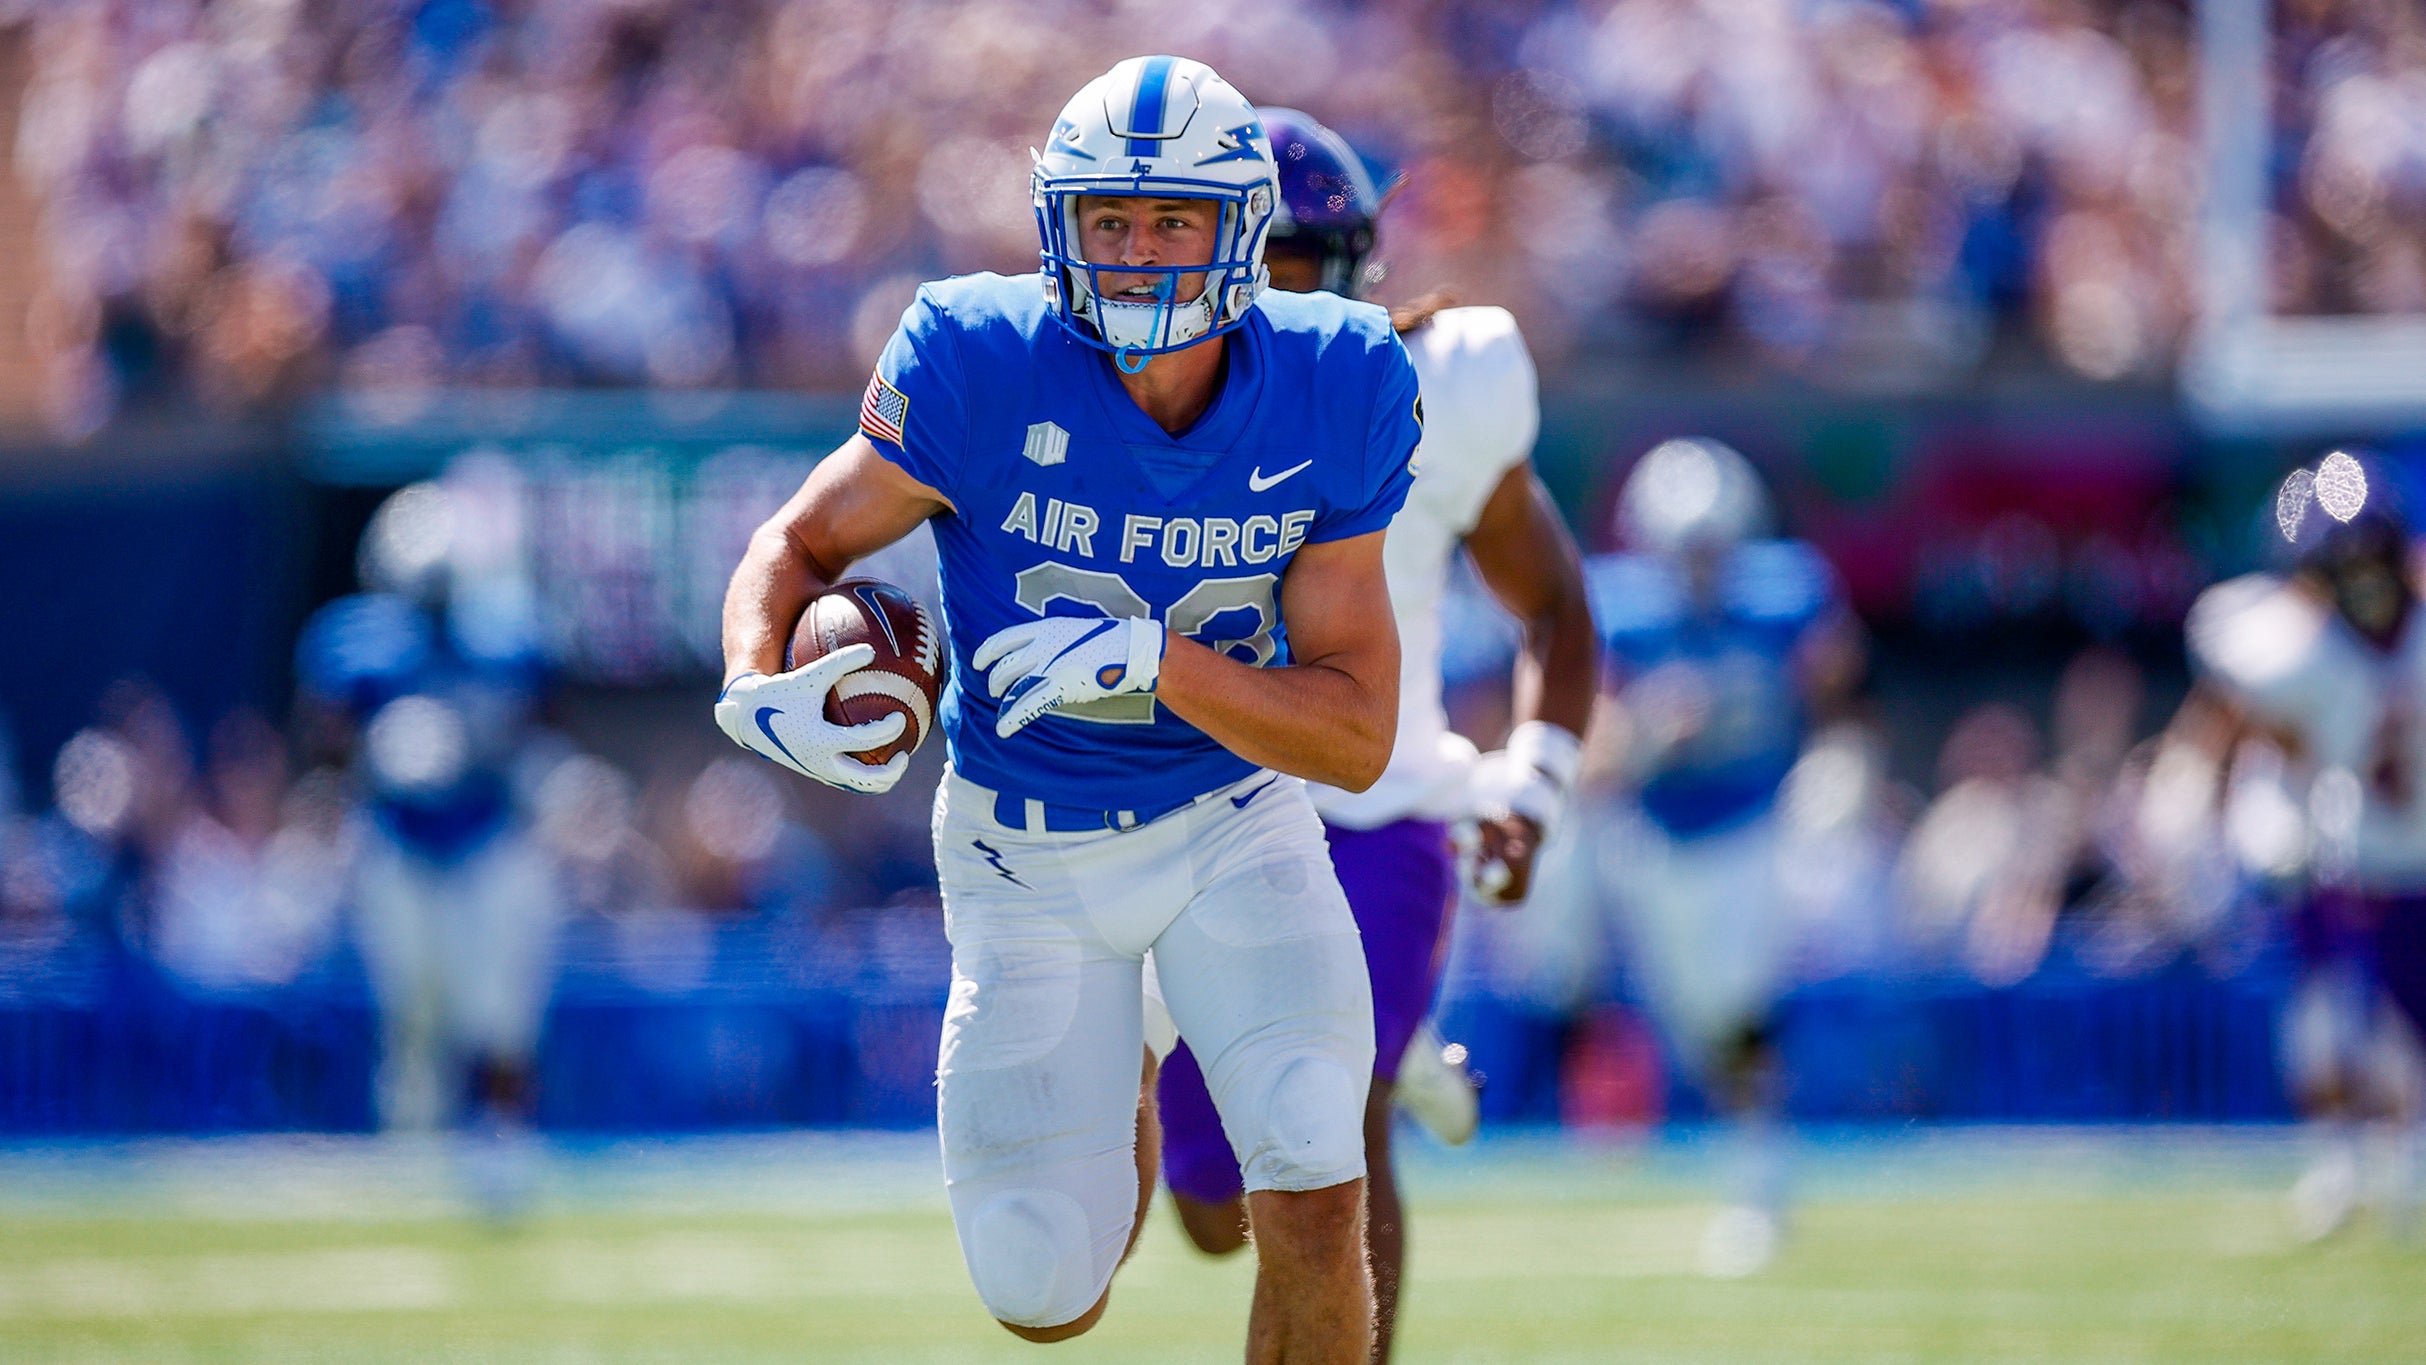 Air Force vs Army presale code for early tickets in Denver